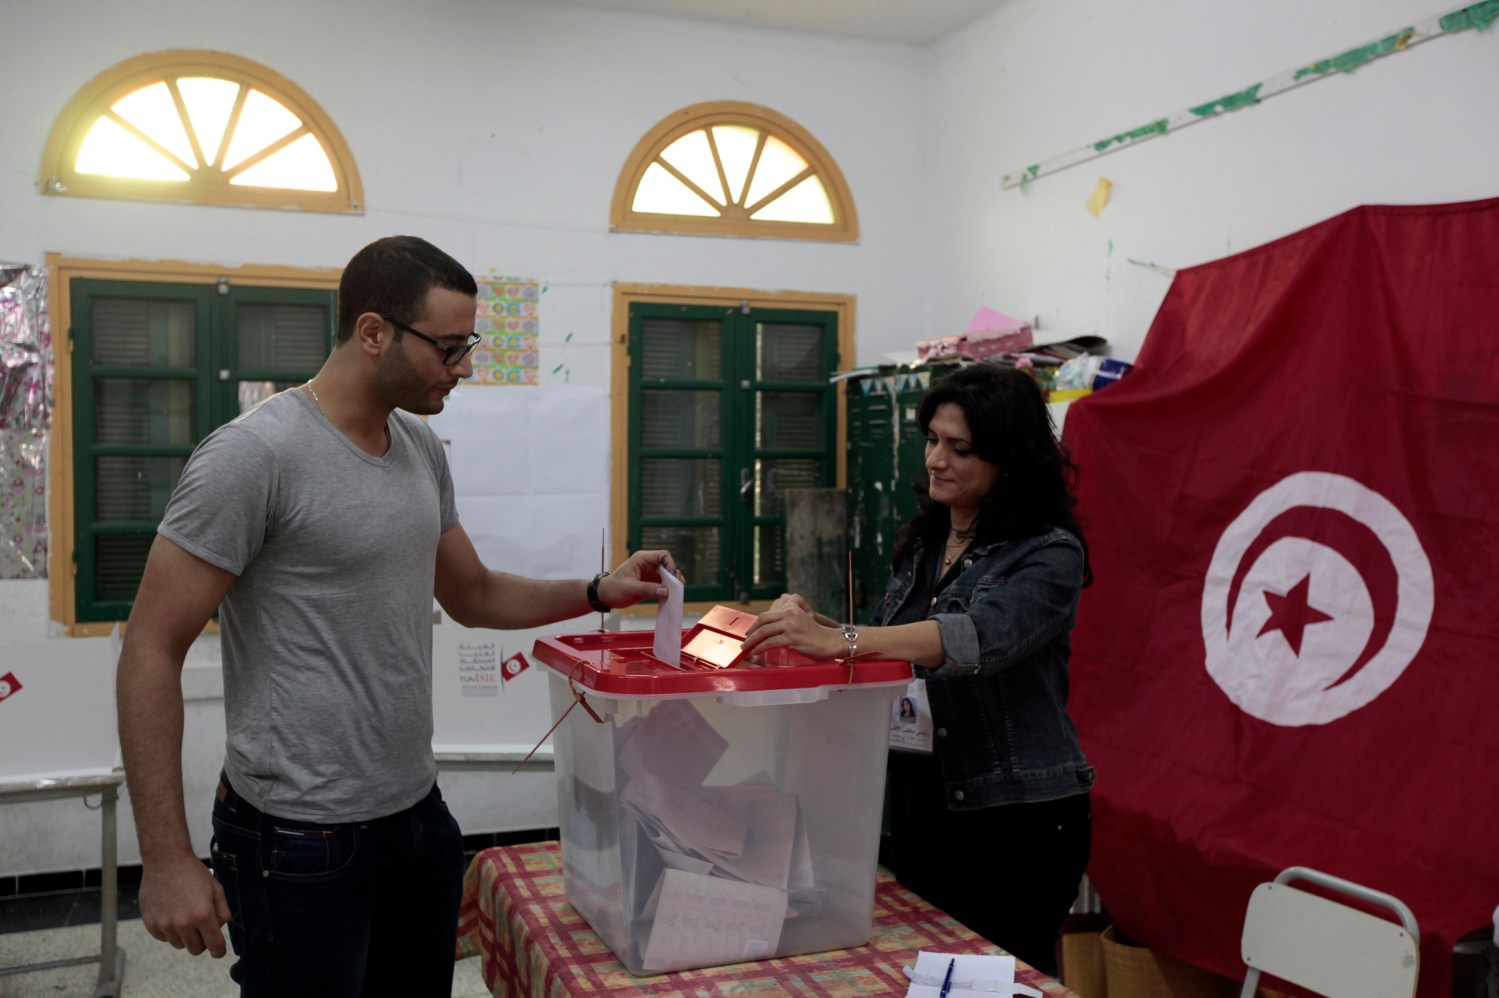 Tunisians cast their votes at a polling station during Tunisia's presidential election in Sousse